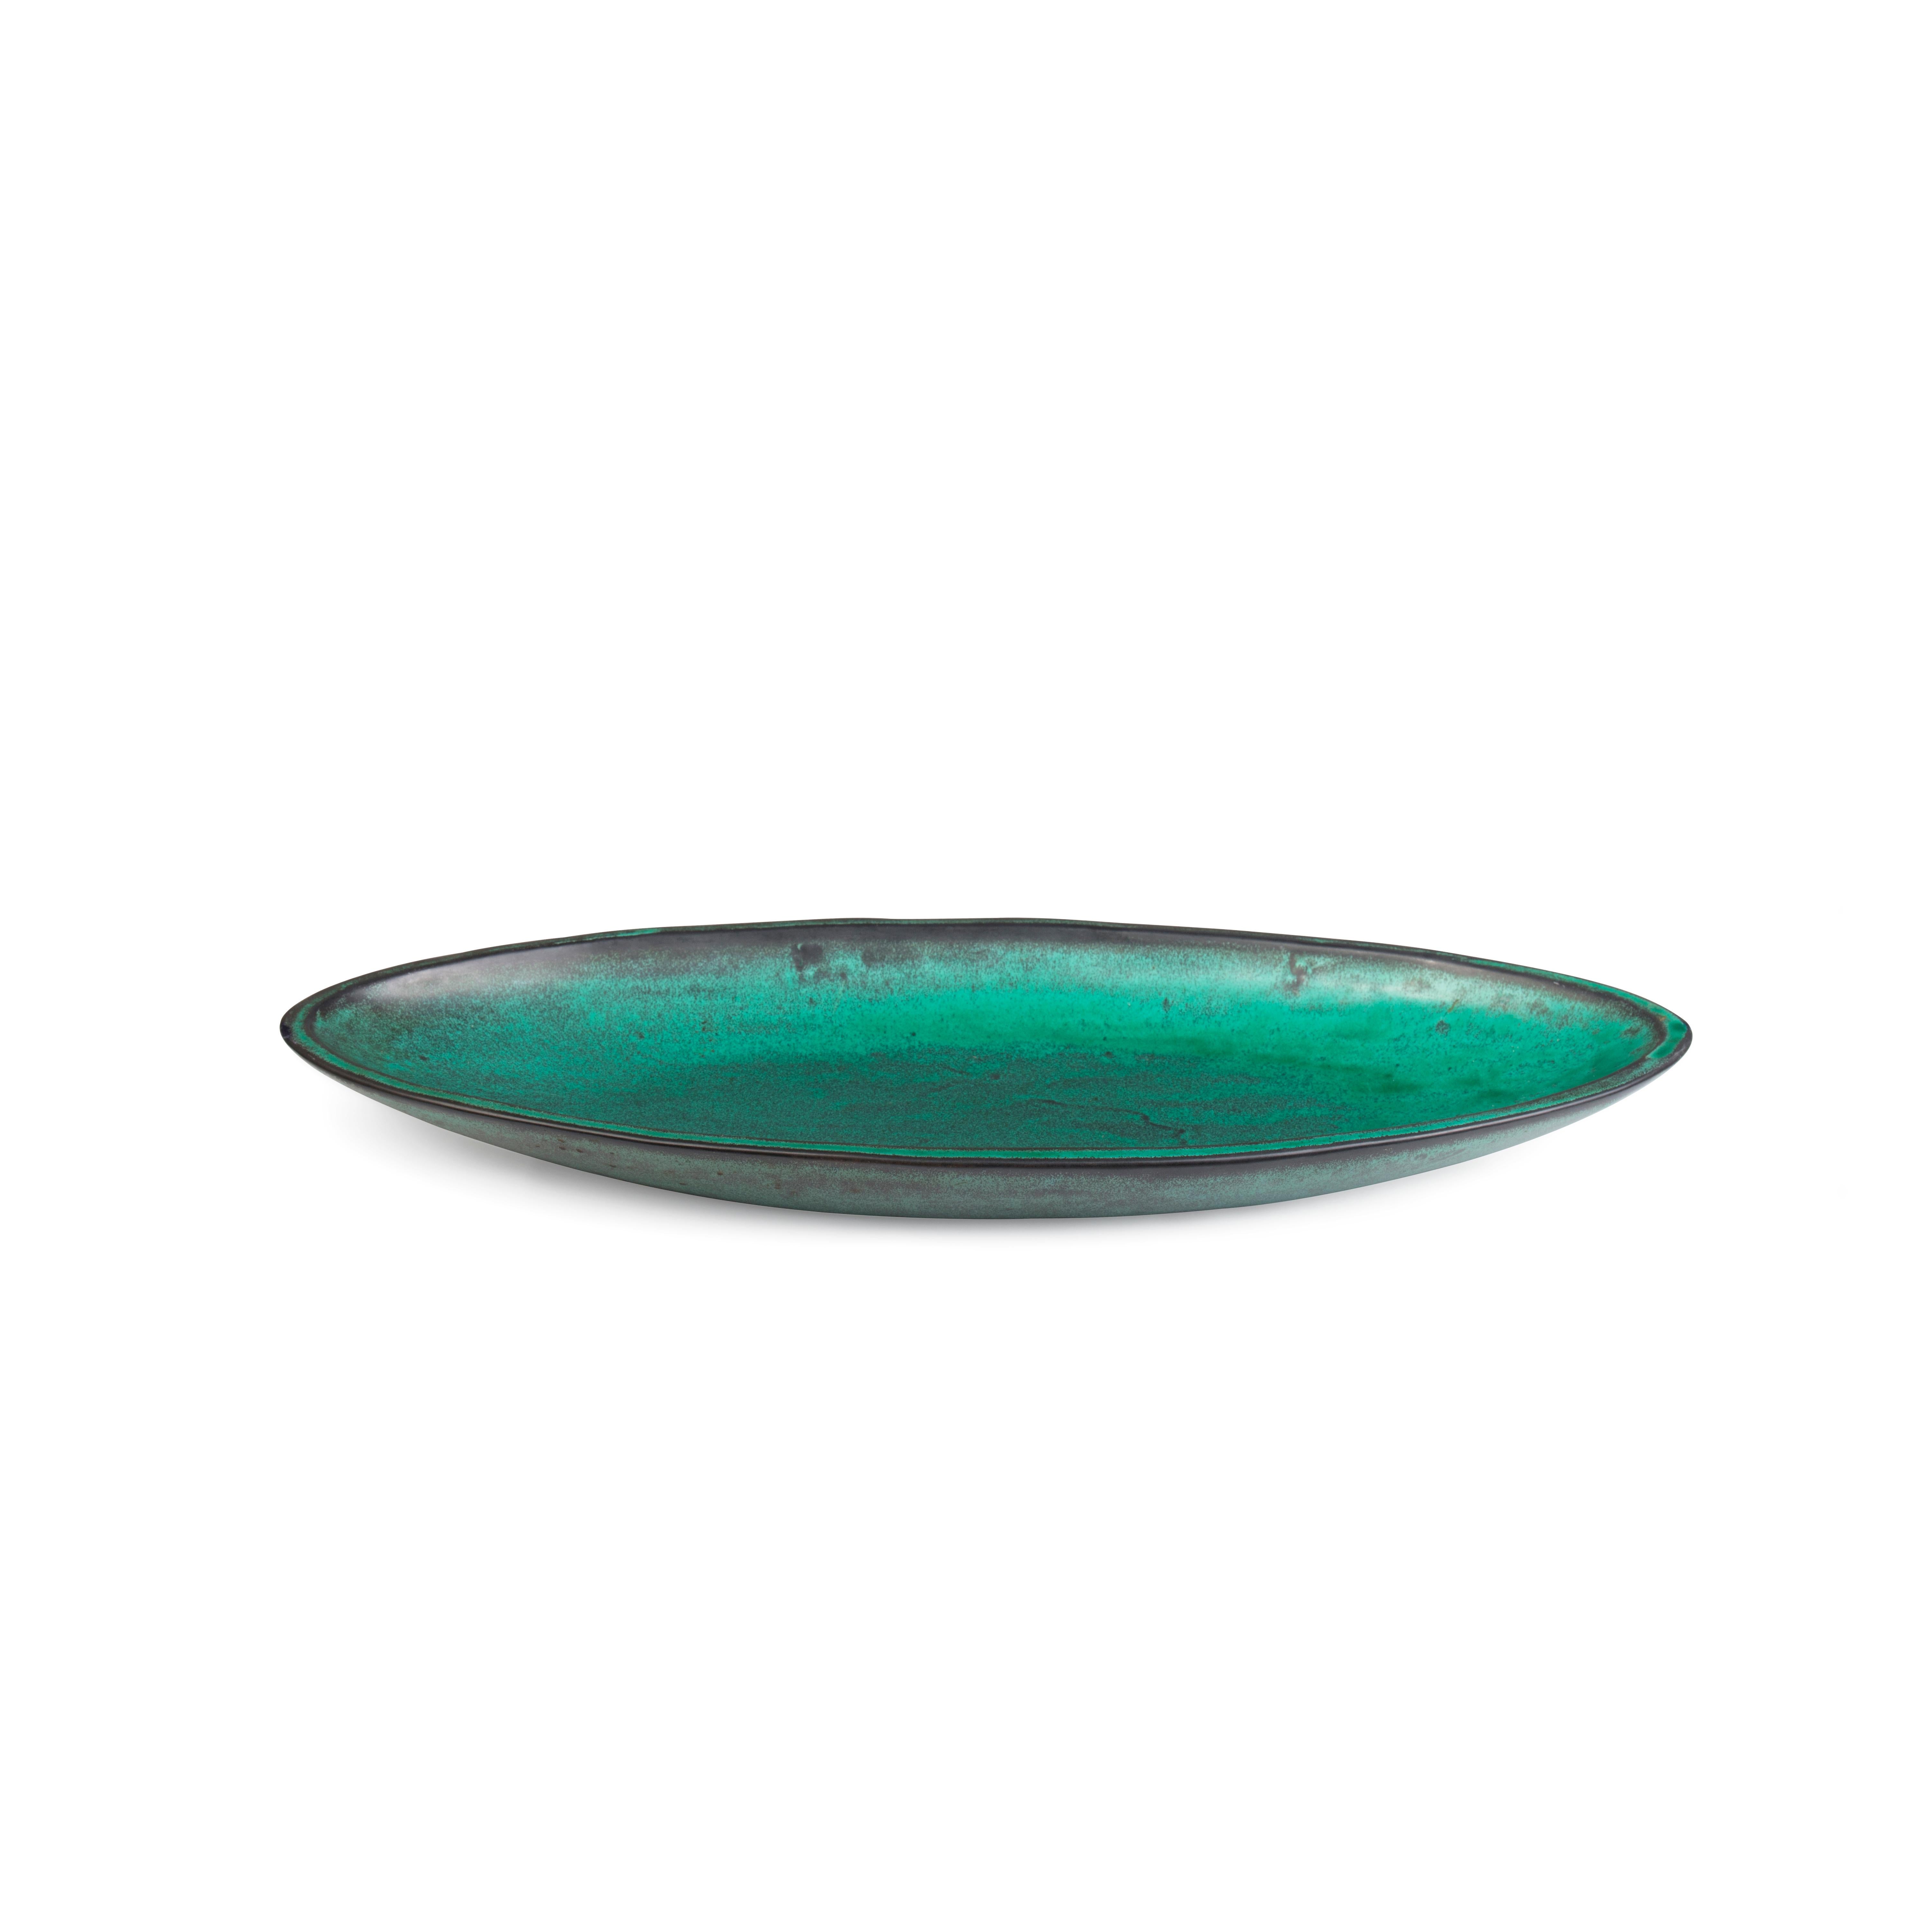 This very large elliptical shaped earthenware dish designed by Nils Kähler (1906-1979) was executed by Herman A. Kähler, Denmark, ca. in the 1940s.

It is decorated with black and turquoise green double glaze.

The dish is incised with the ‘HAK’